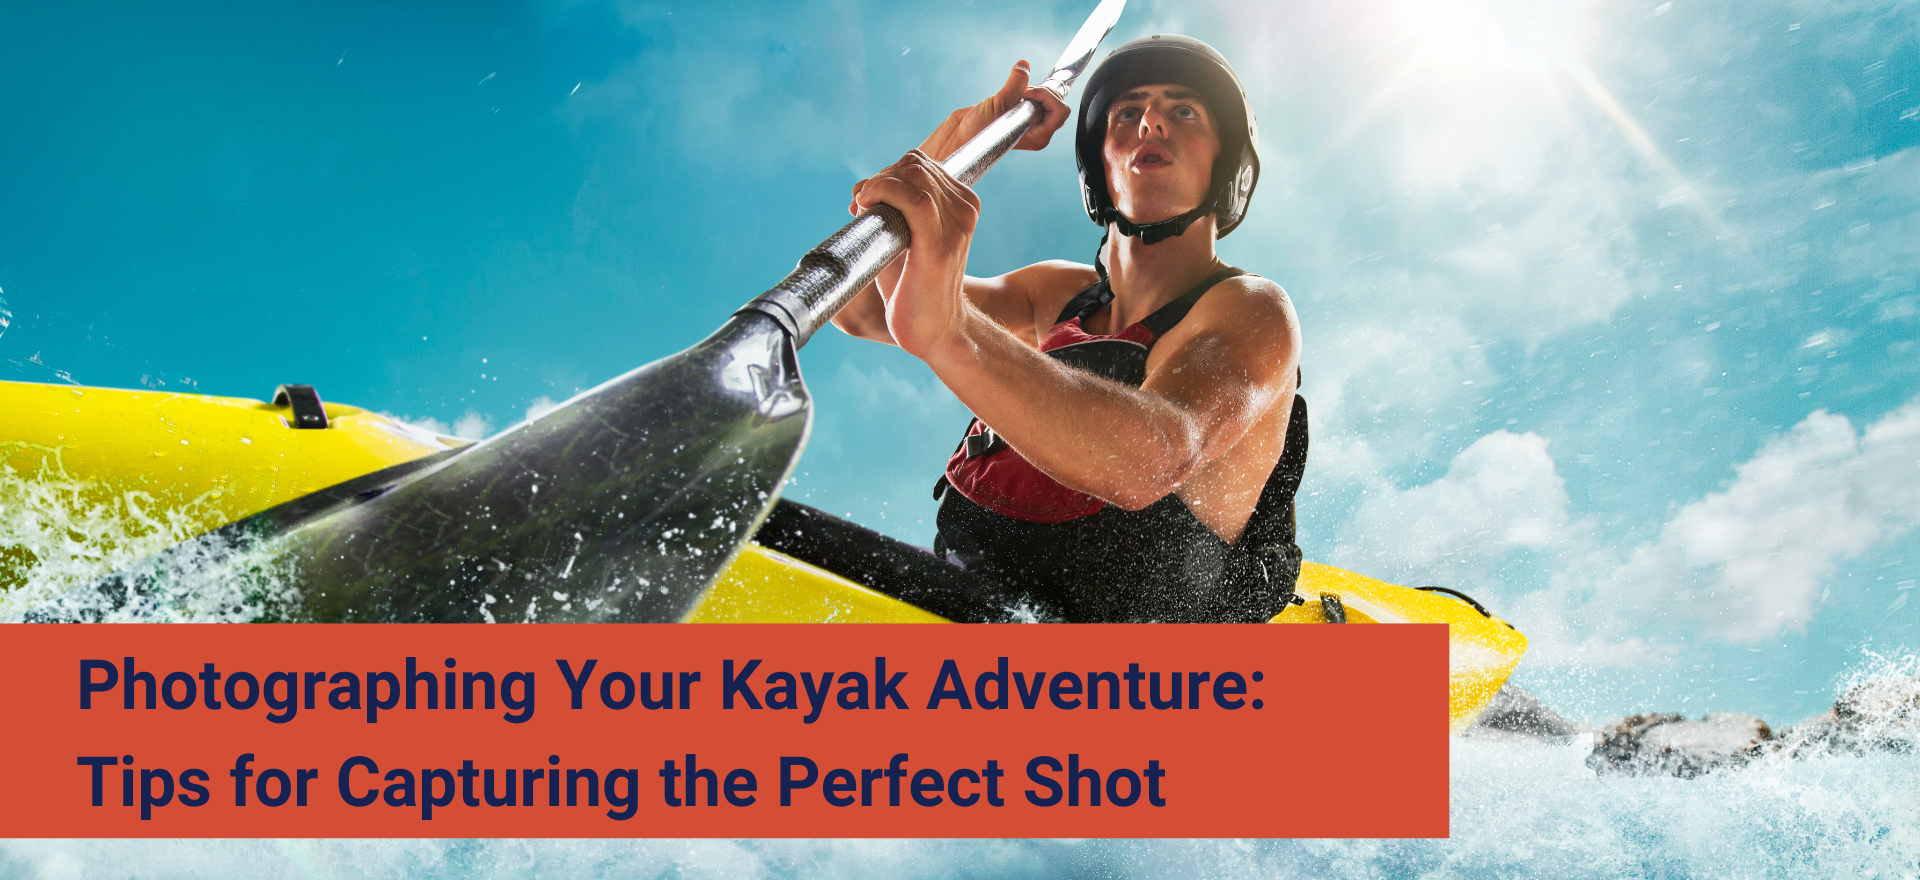 Photographing Your Kayak Adventure: 5 Tips for Capturing the Perfect Shot